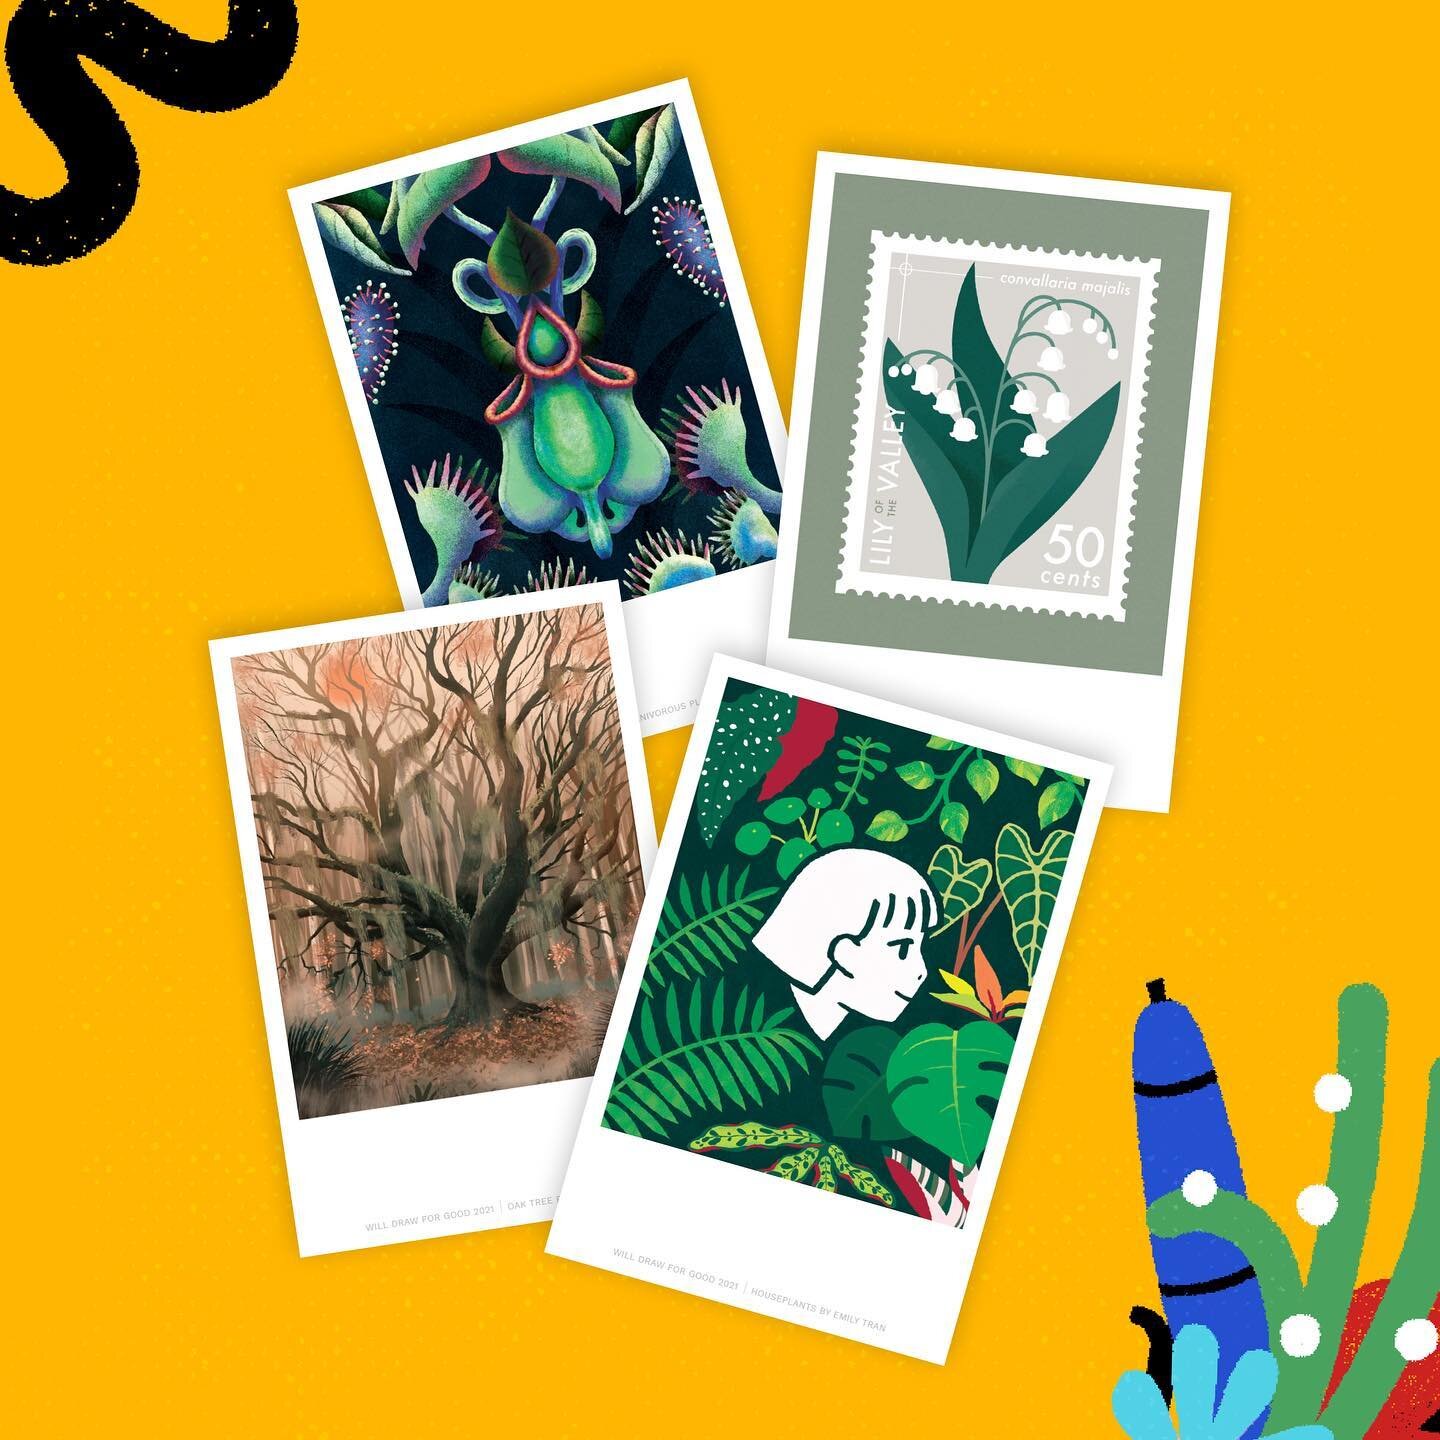 Can&rsquo;t decide on a print? Choose from our flora and fauna postcard sets! Very limited quantities are available for both postcards and prints, so get your order in!

Browse 25 flora and fauna illustrations at willdrawforgood.com today 💐

#wdfg #